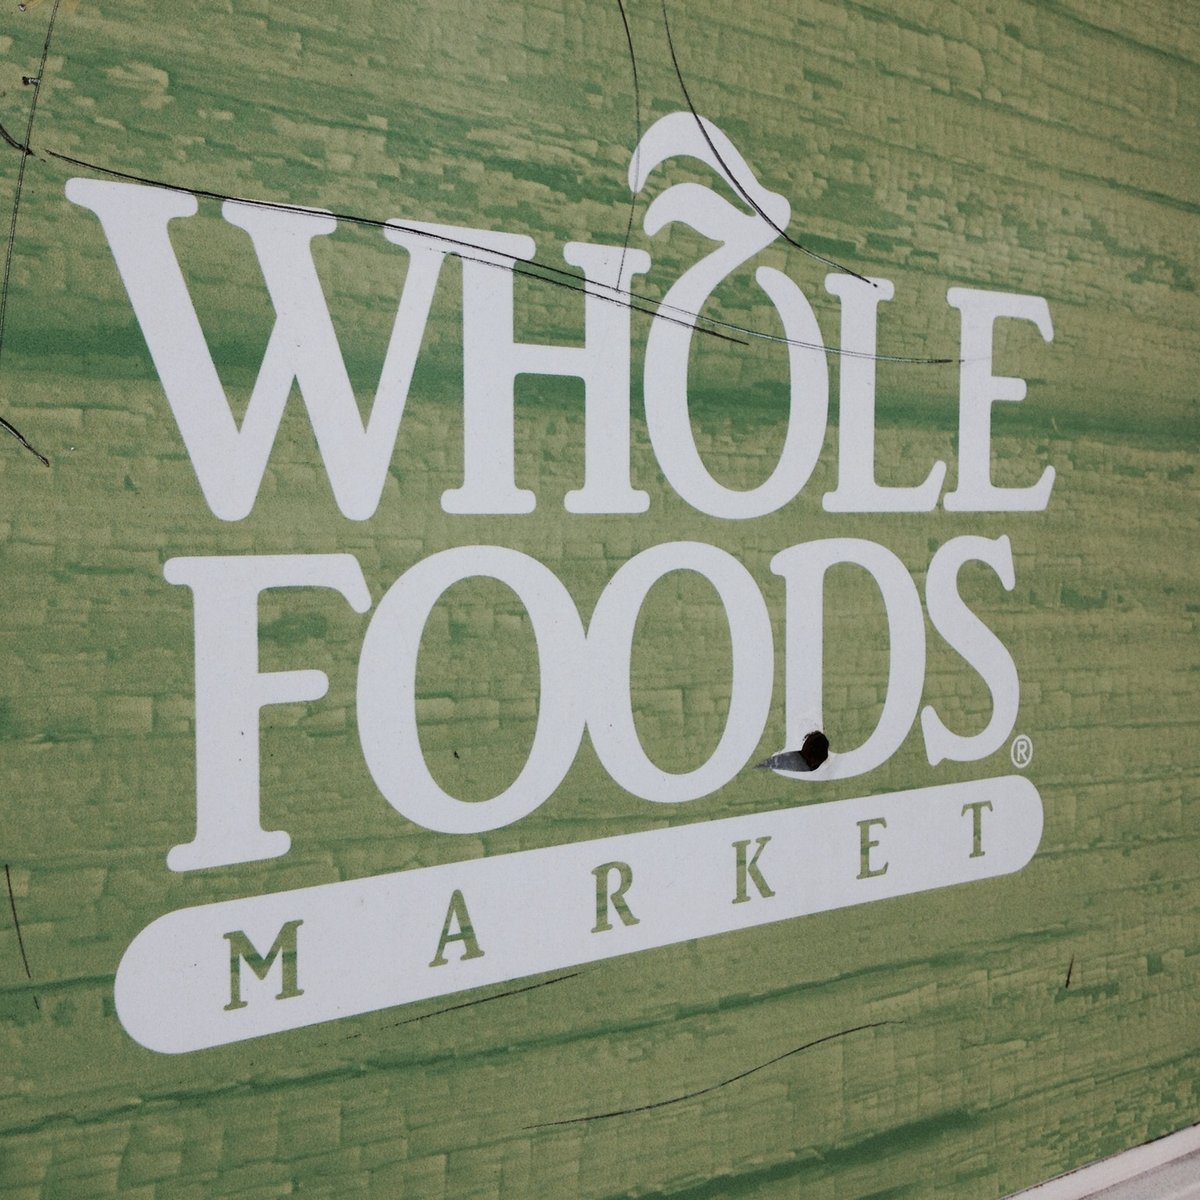 Smallhold Announces Nationwide Expansion with Whole Foods Market